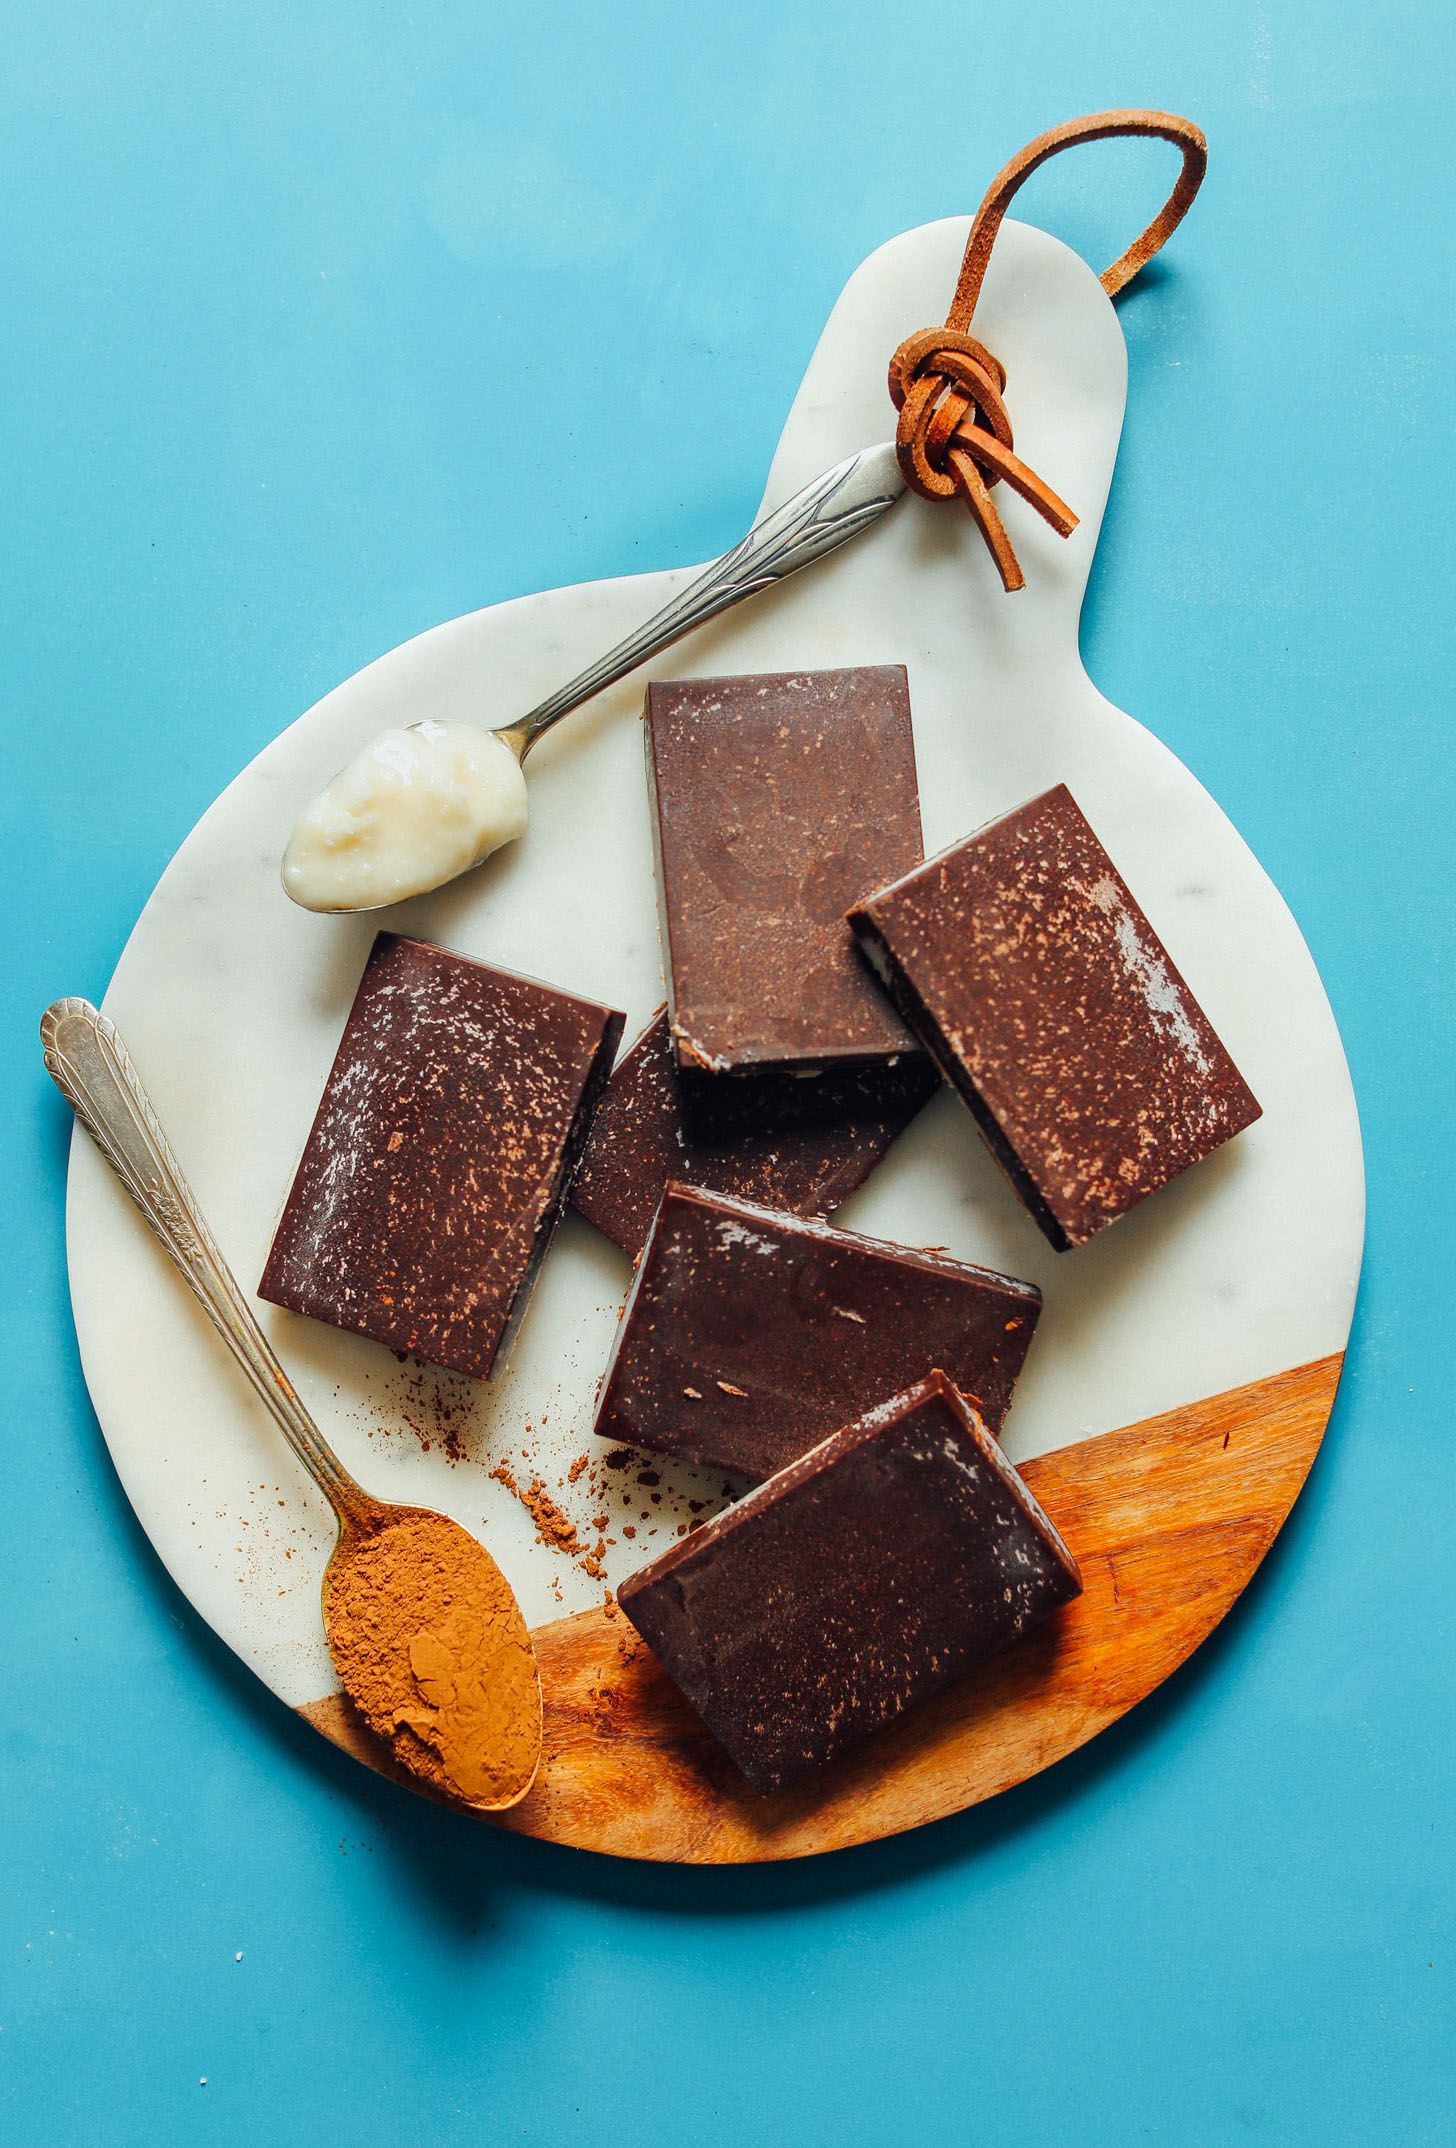 Several Sugar-Free Coconut Carob Bars alongside a spoonful each of coconut butter and carob powder